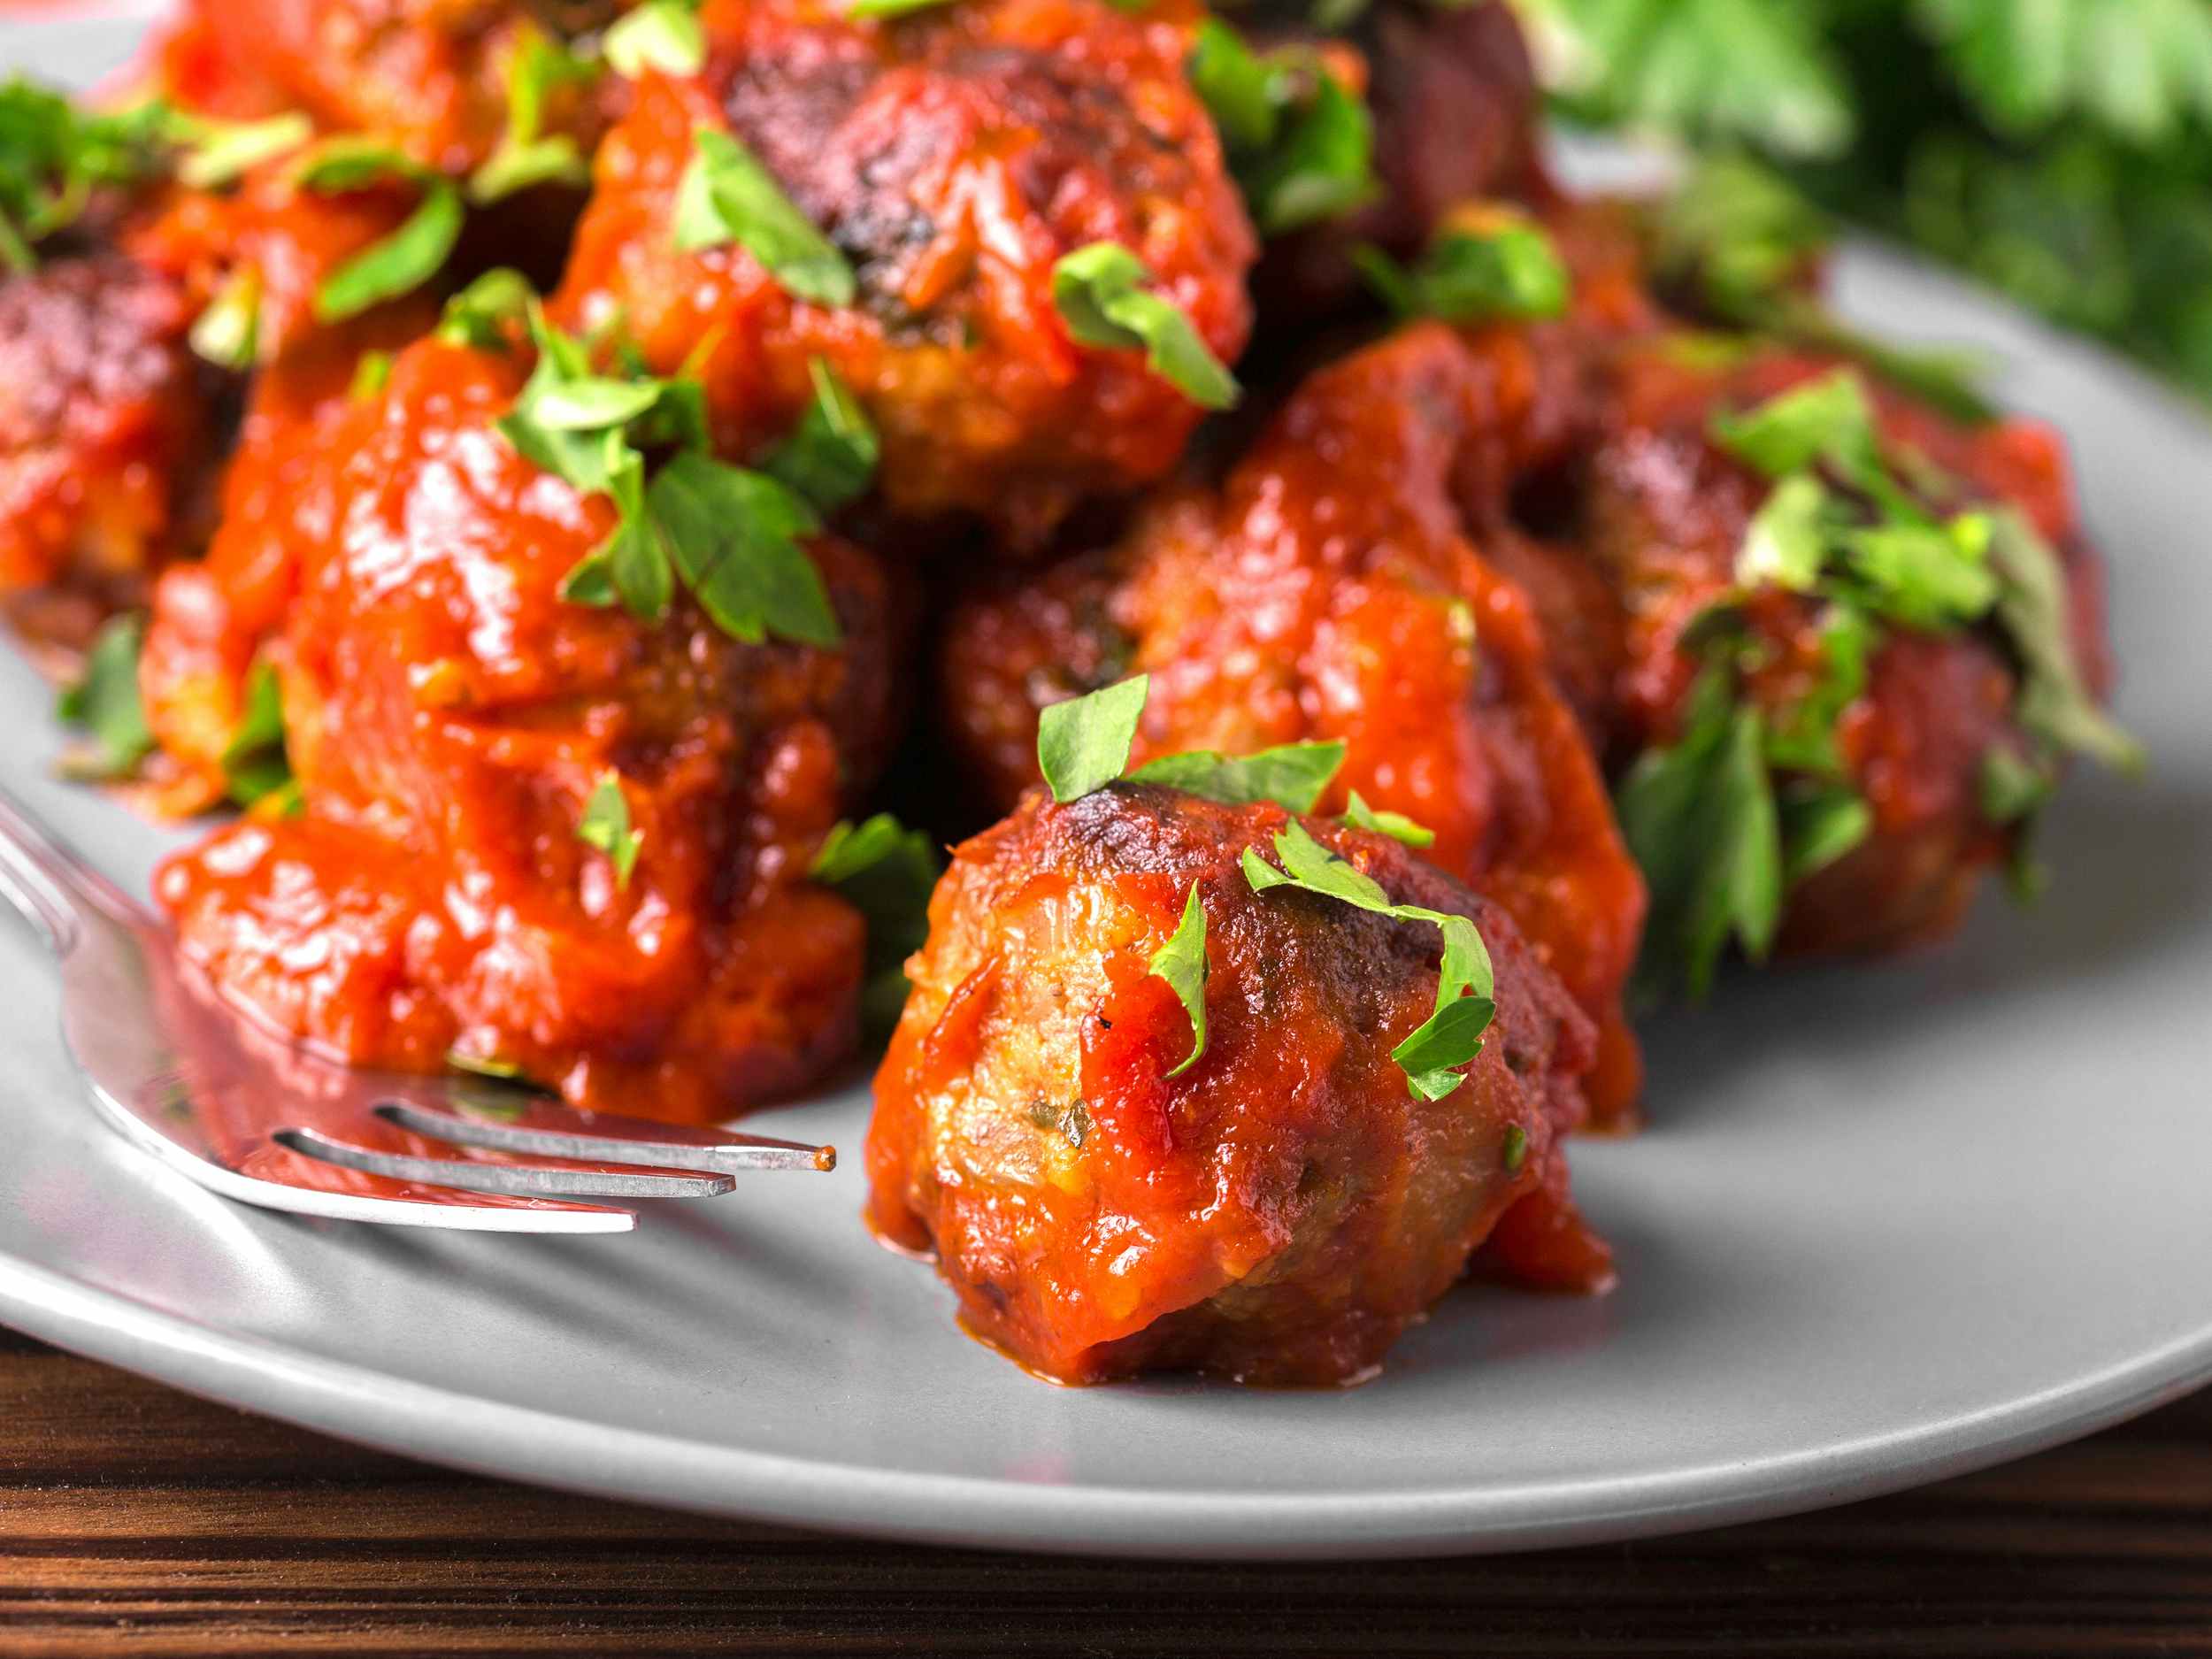 meatballs in marinara sauce and parsley on plate